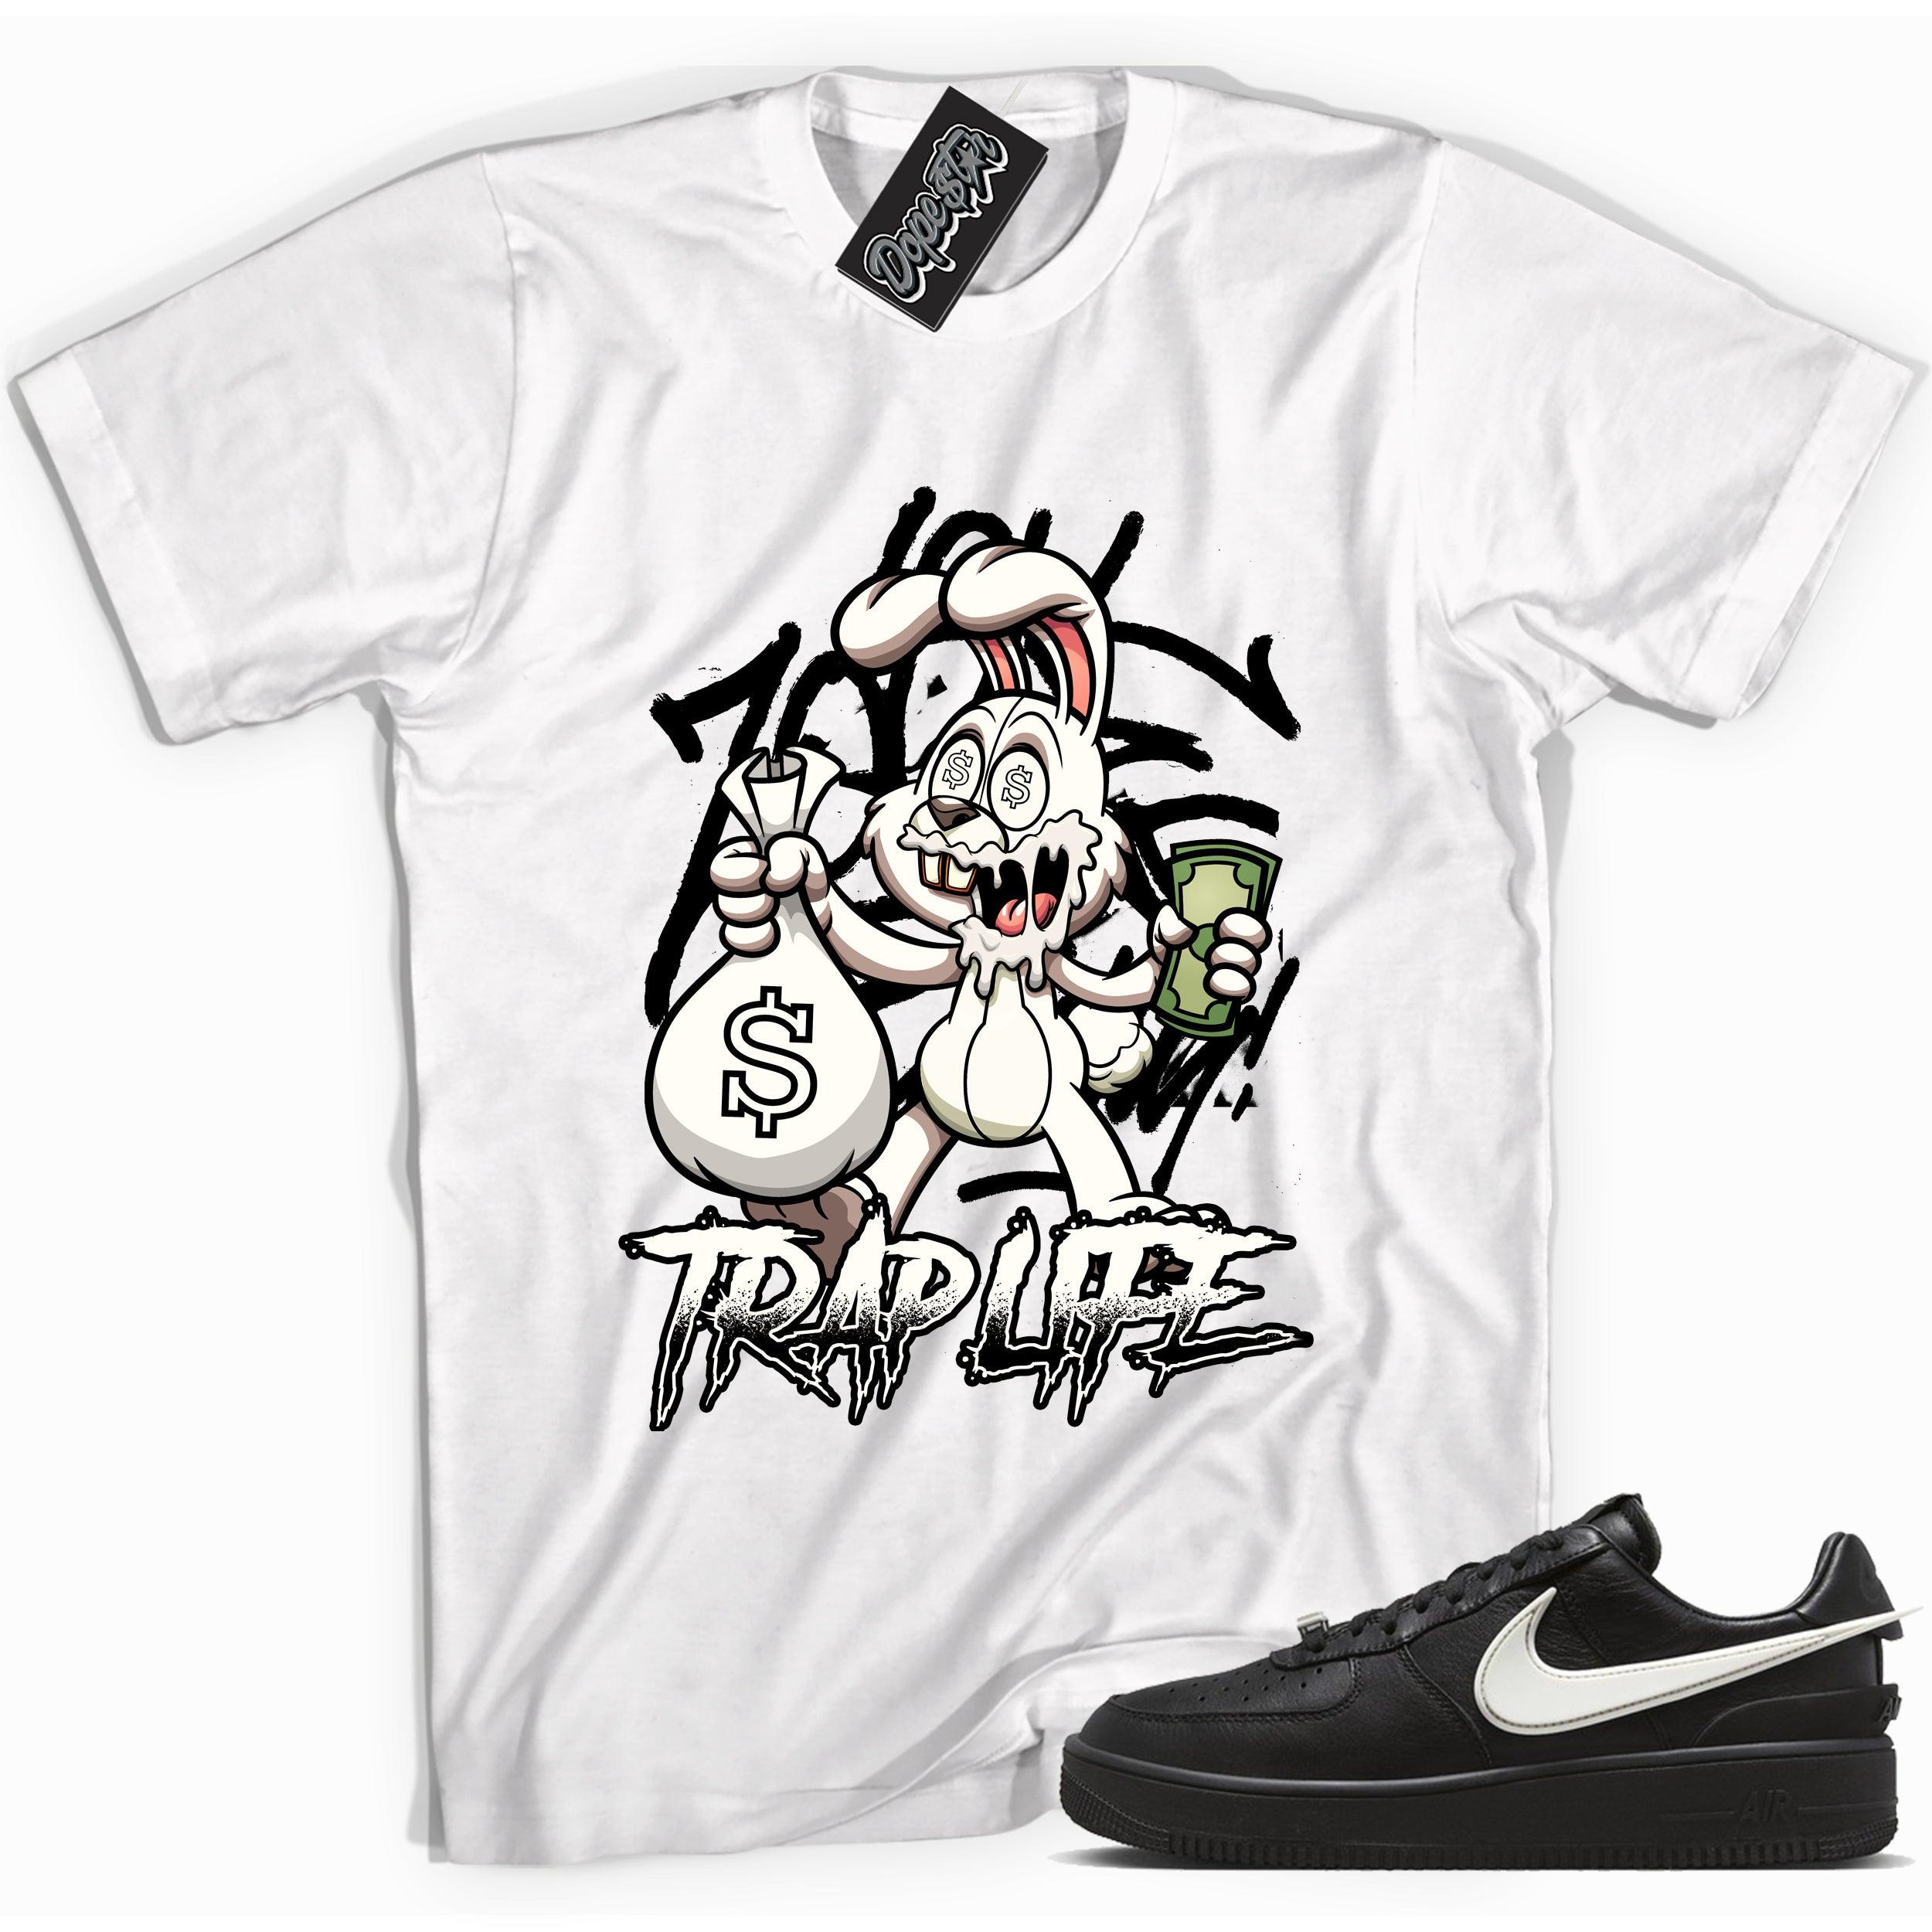 Cool white graphic tee with 'trap rabbit' print, that perfectly matches Nike Air Force 1 Low Ambush Phantom Black sneakers